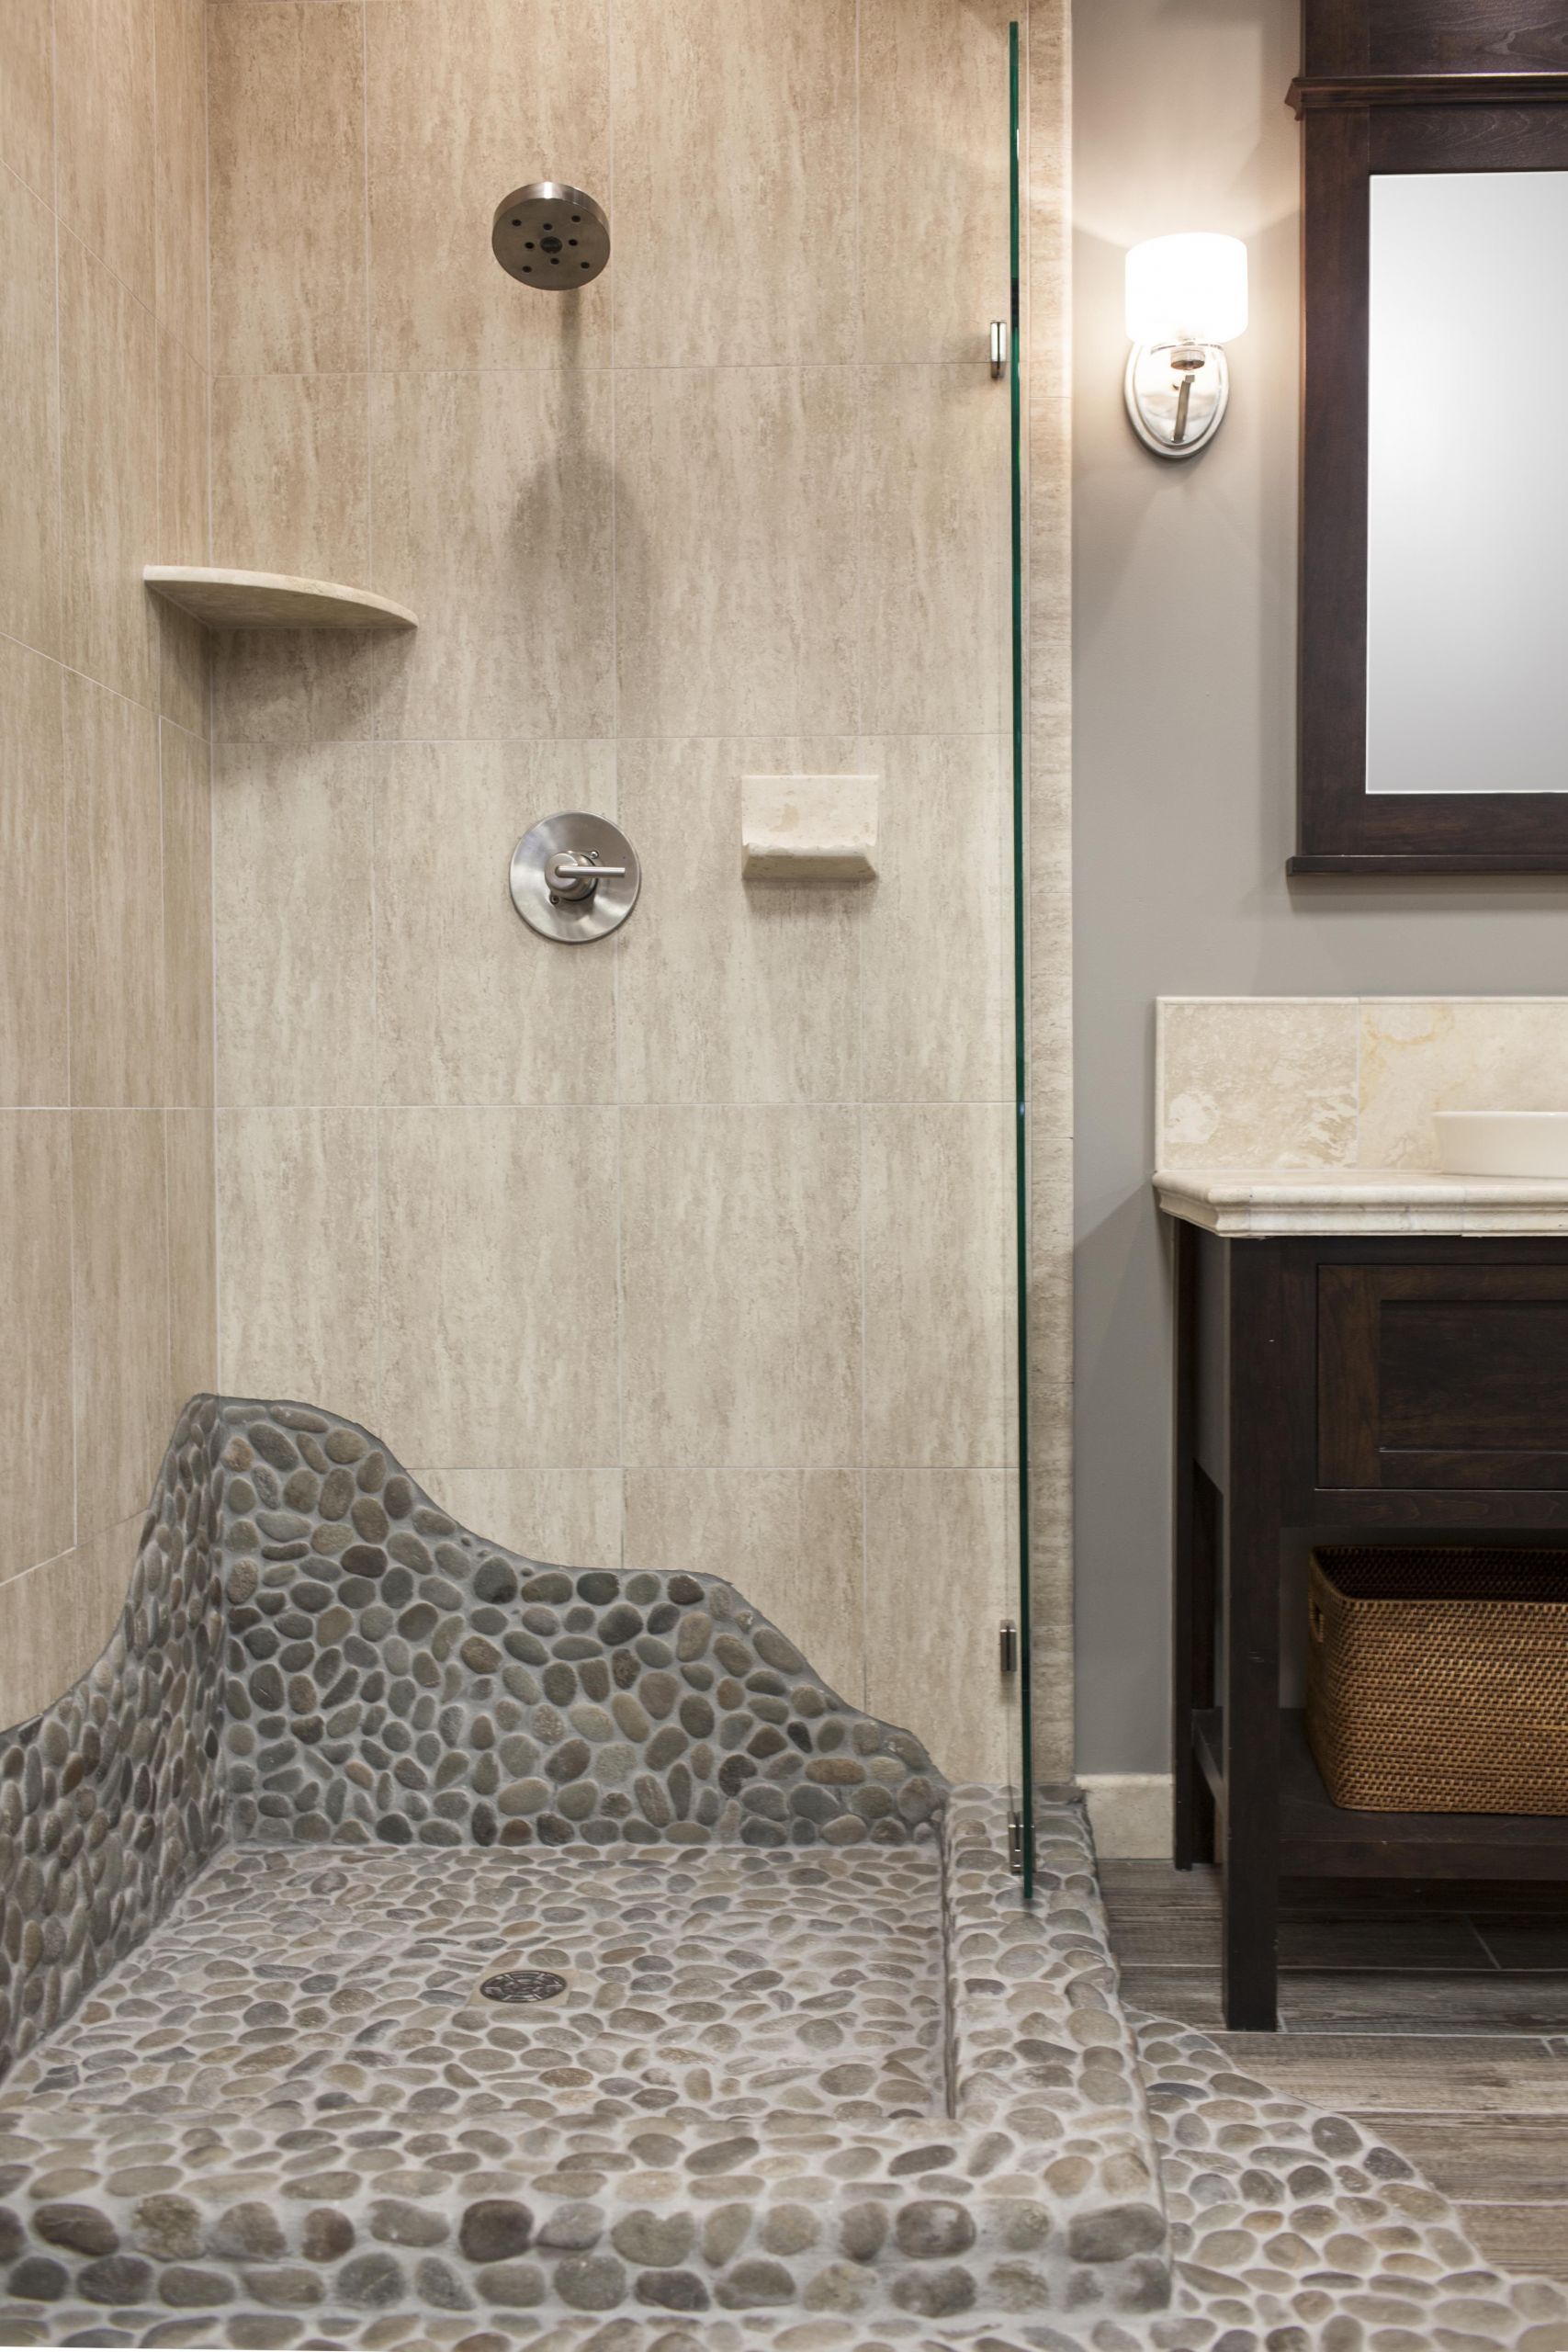 Mosaic Bathroom Tiles
 This shower brings elements of nature with a shower pan